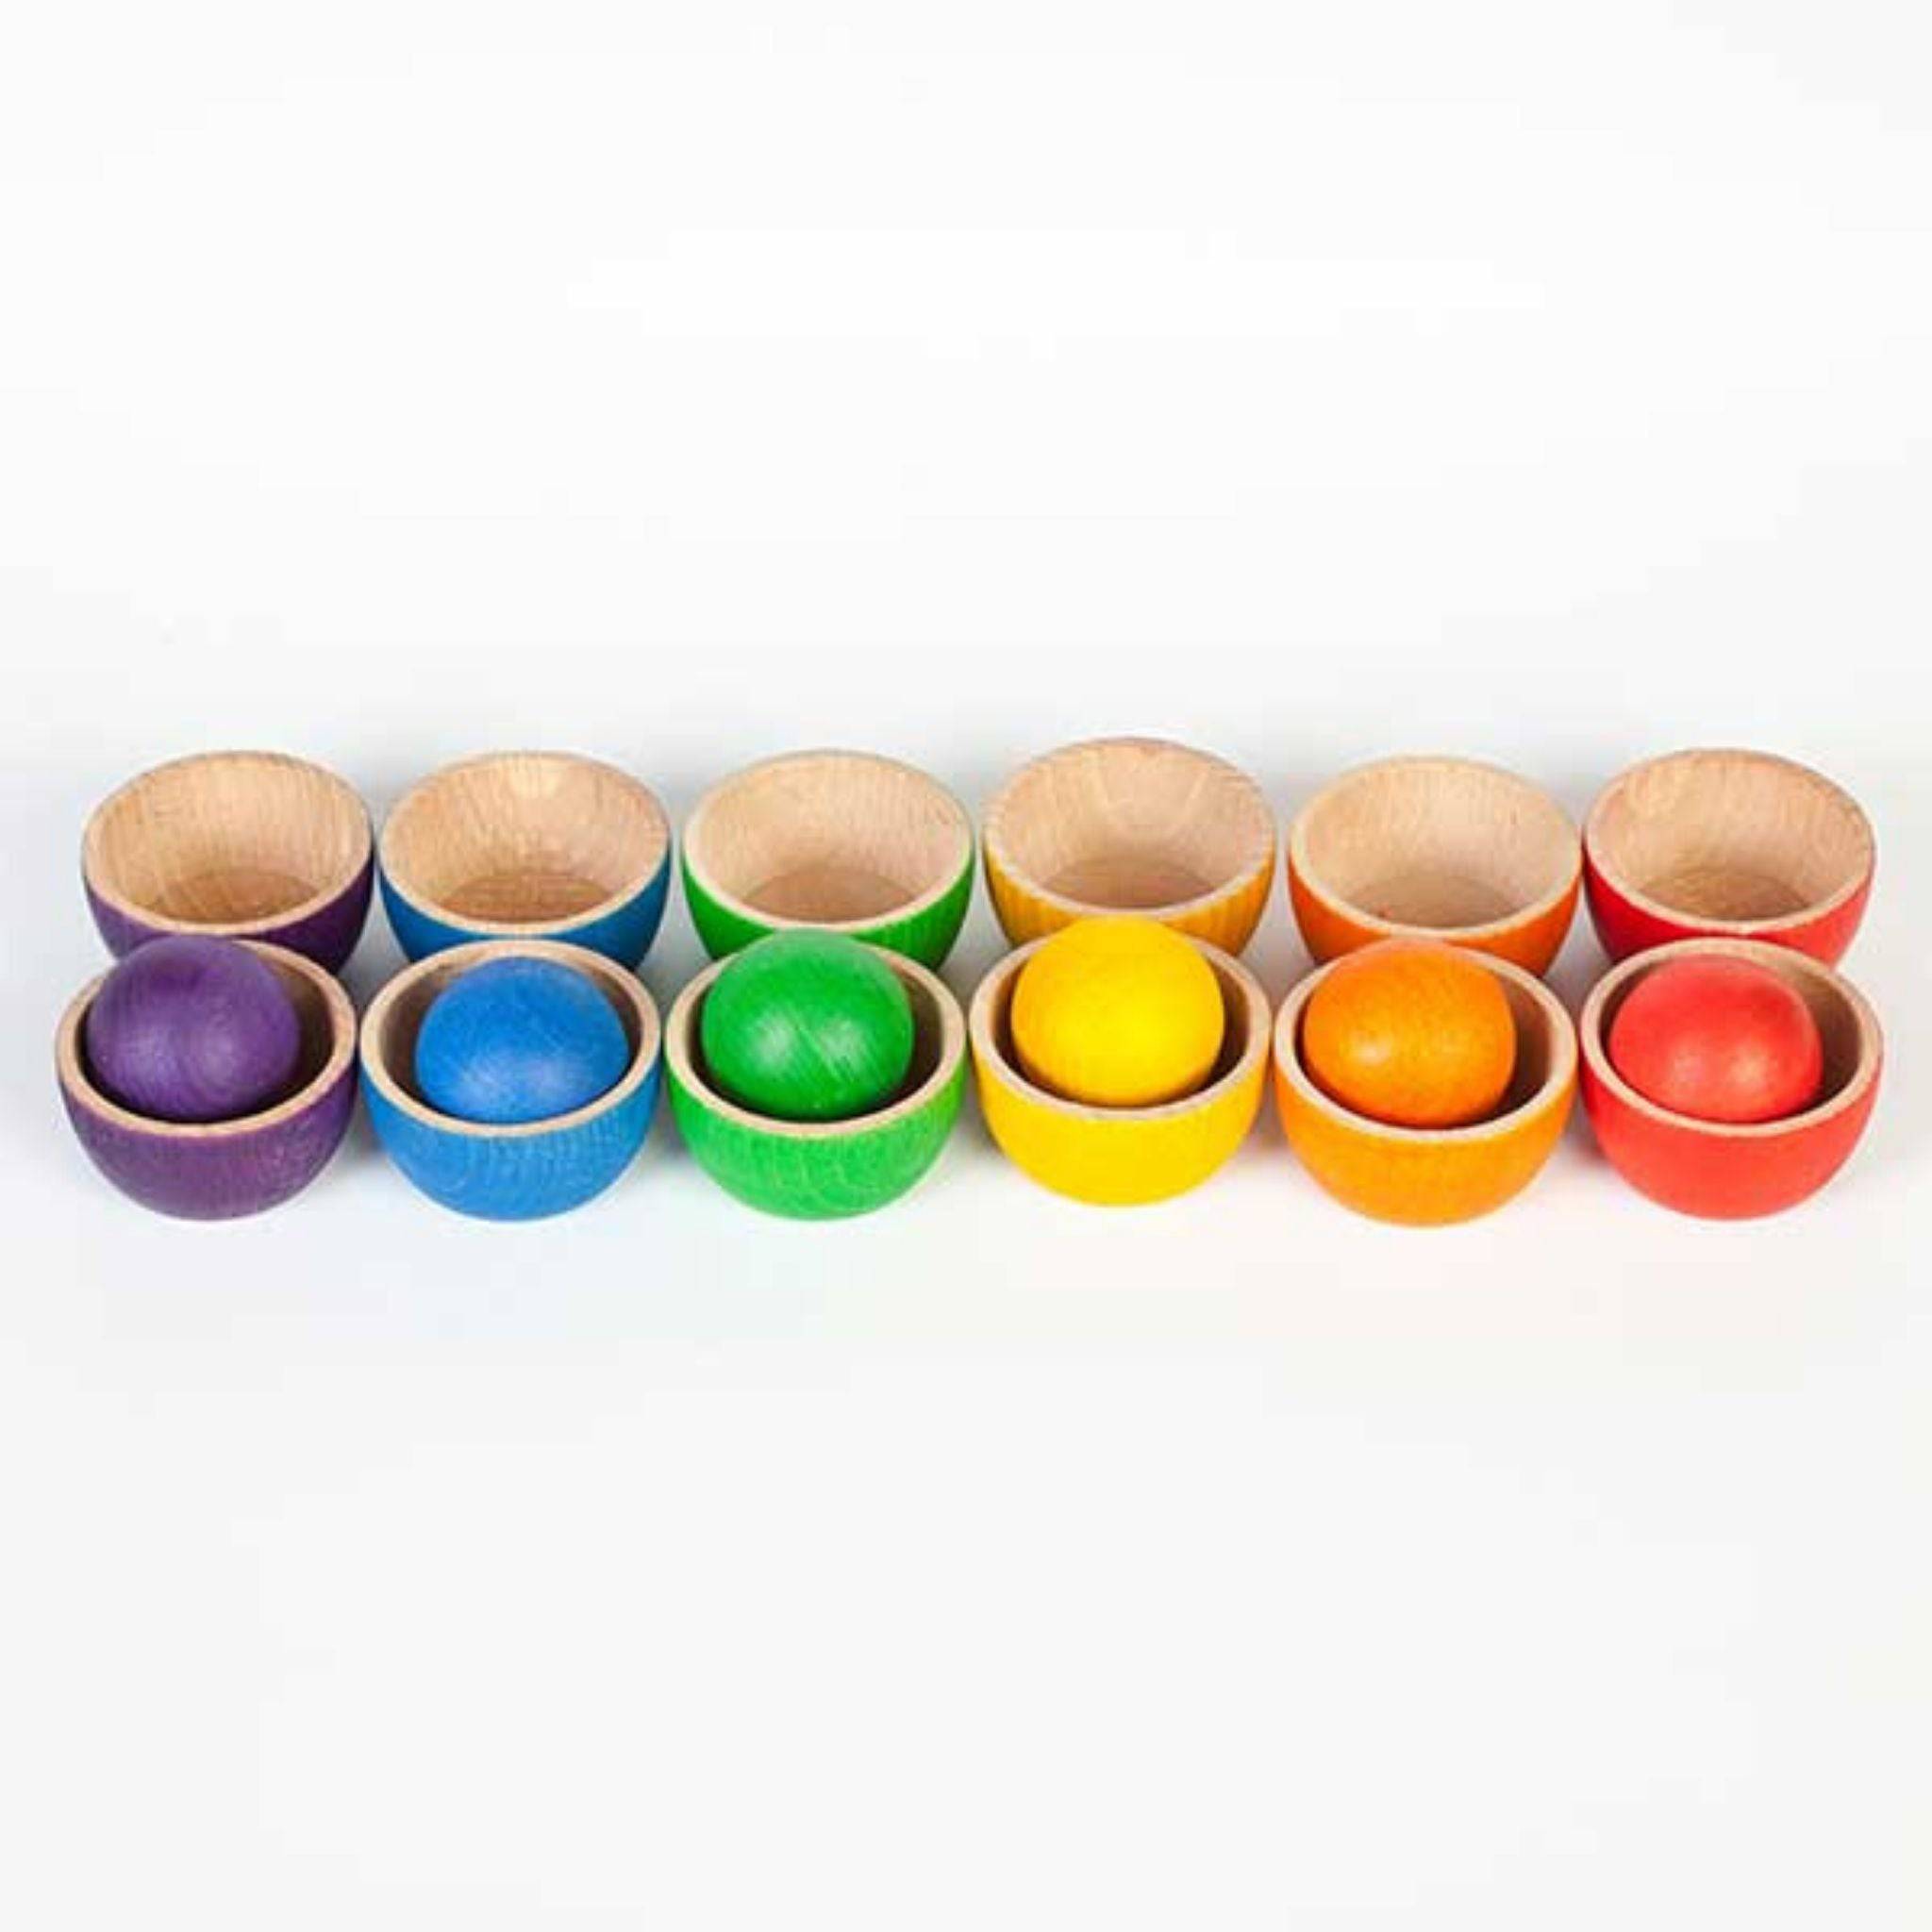 Wooden Cup & Ball - House of Marbles US